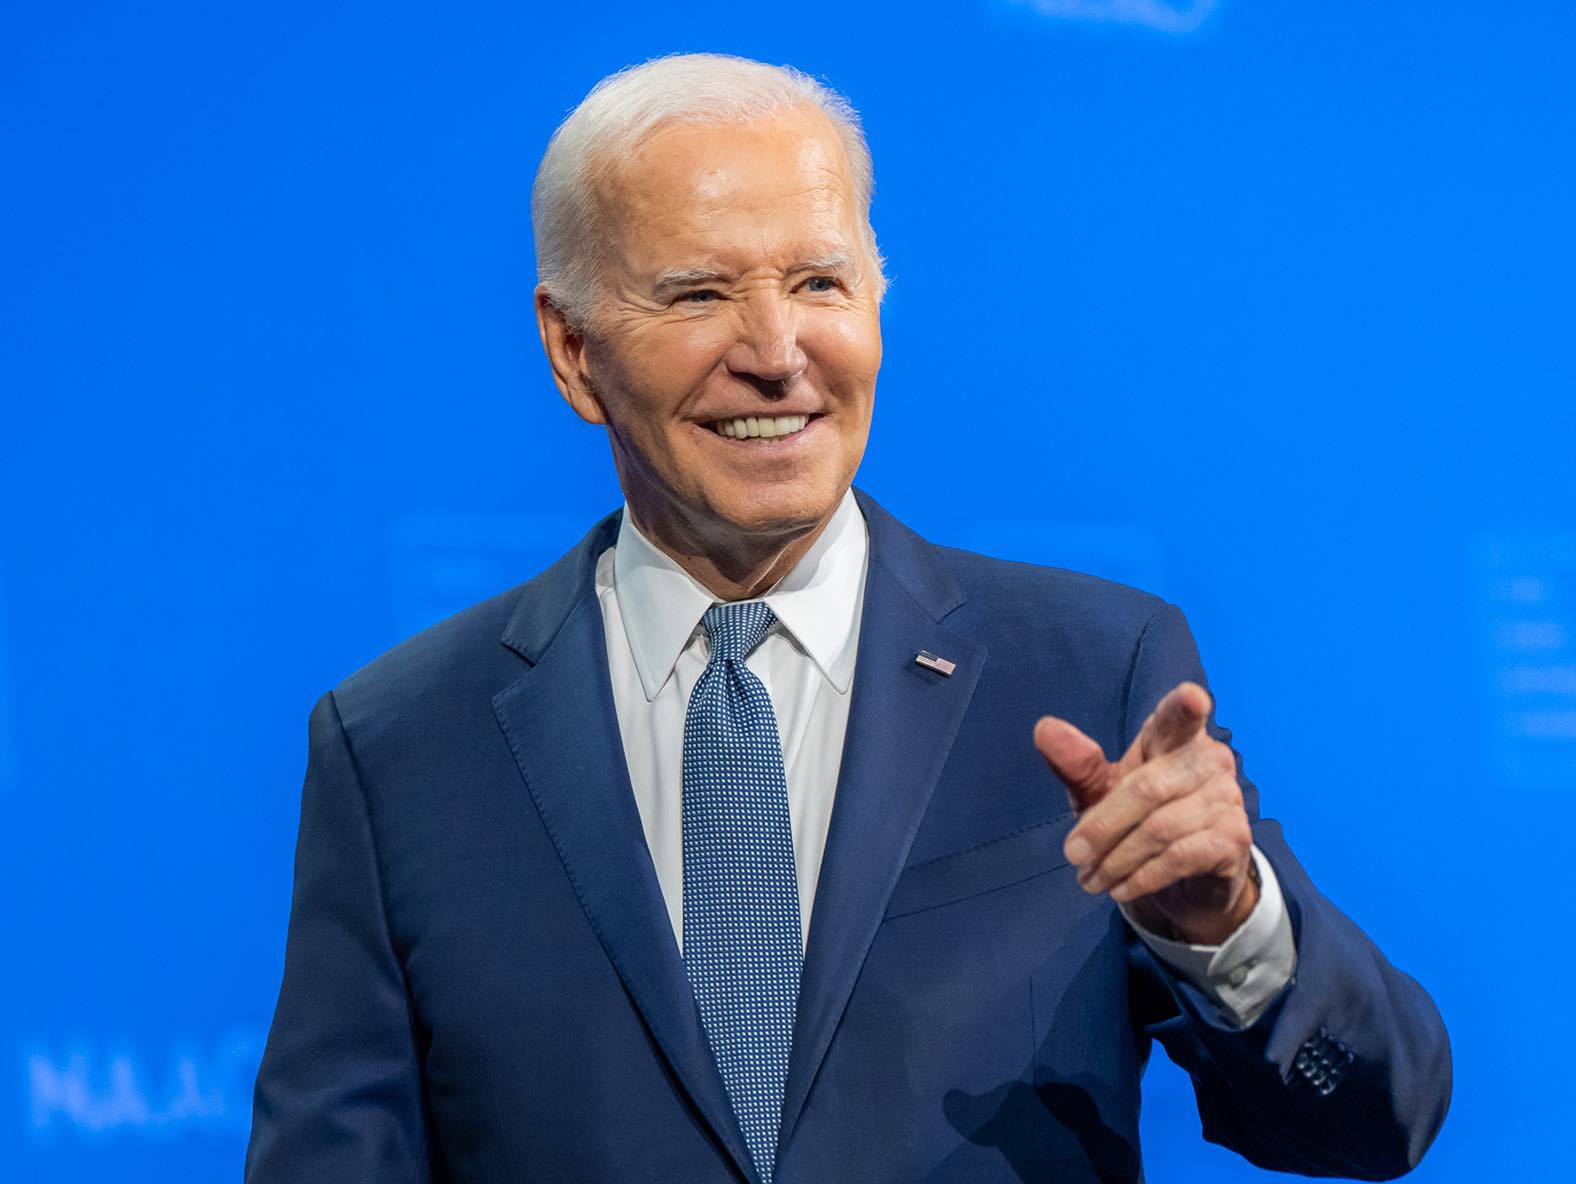 Markets React to Biden’s Withdrawal from 2024 Race